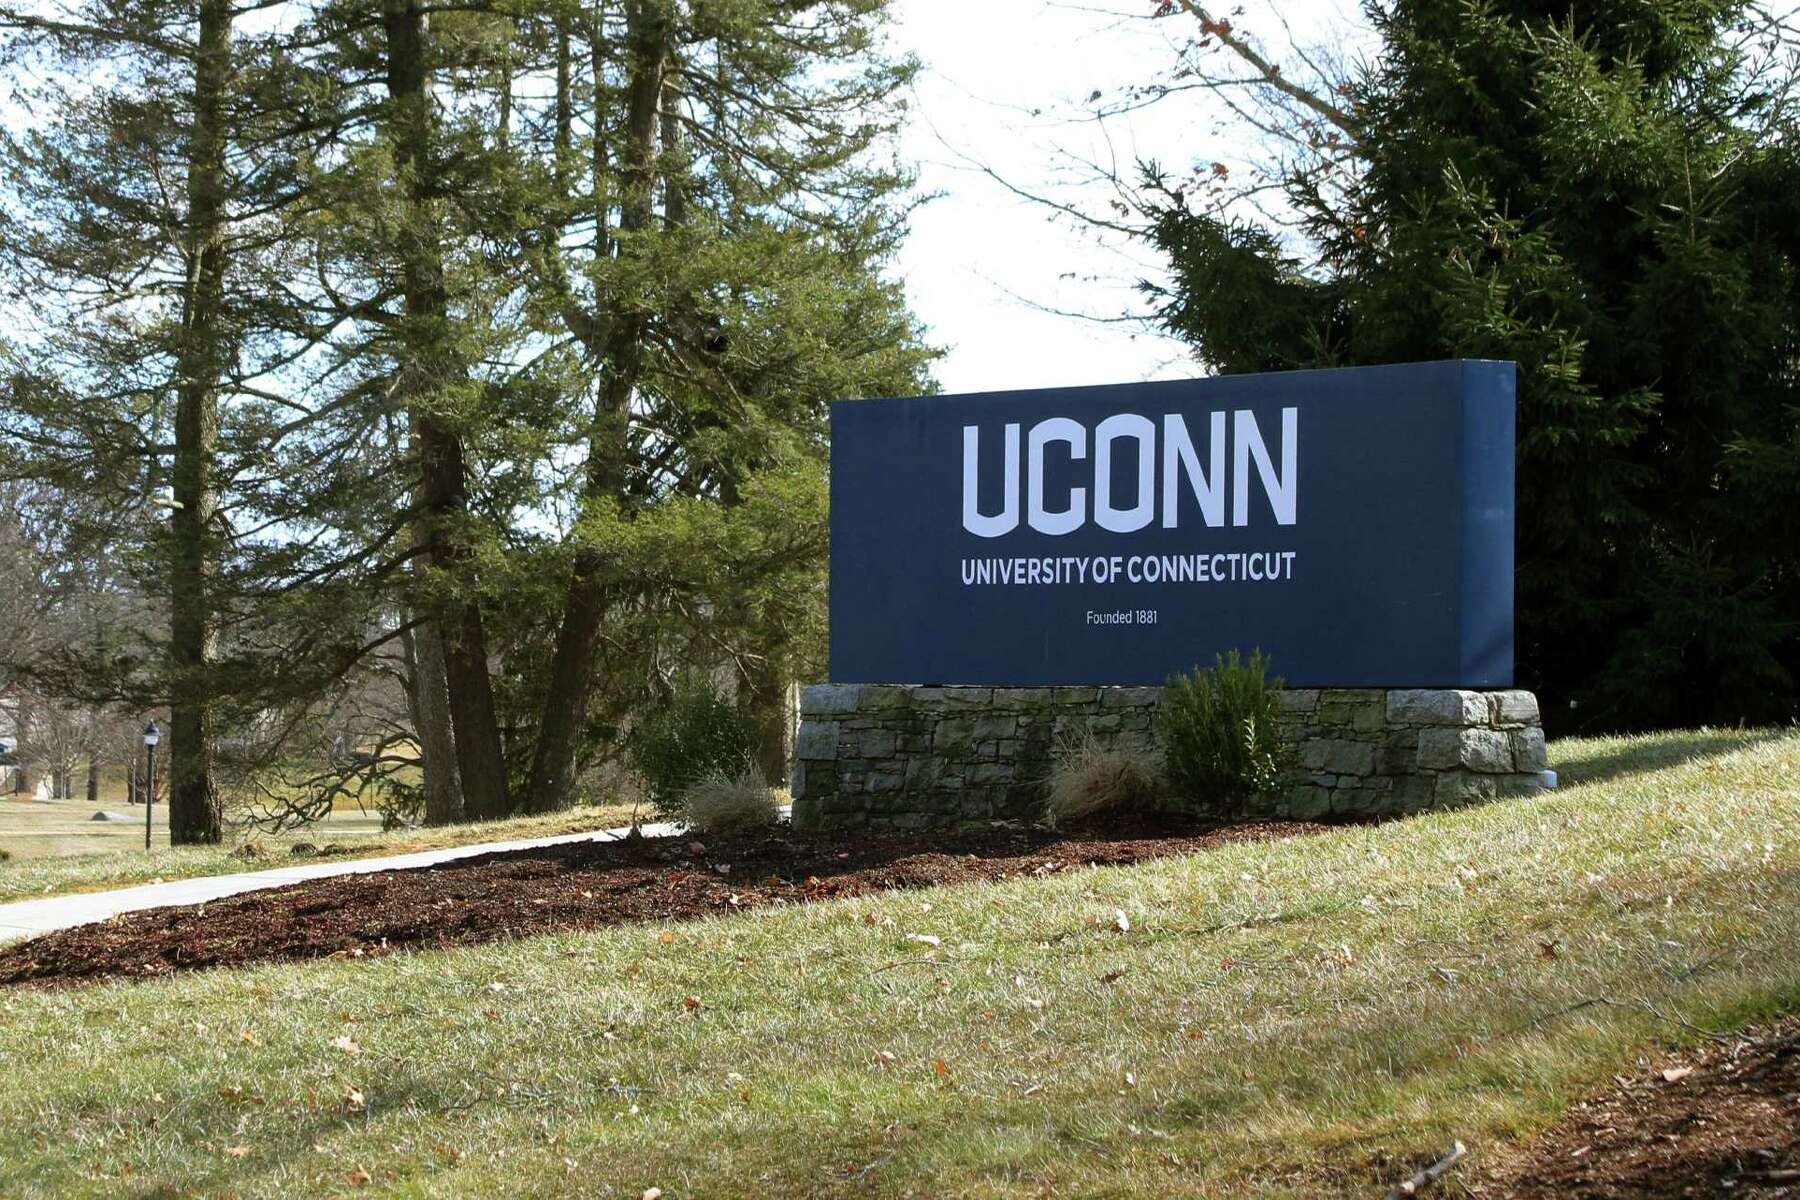 UConn investigates 'hateful conduct and speech' on Storrs campus